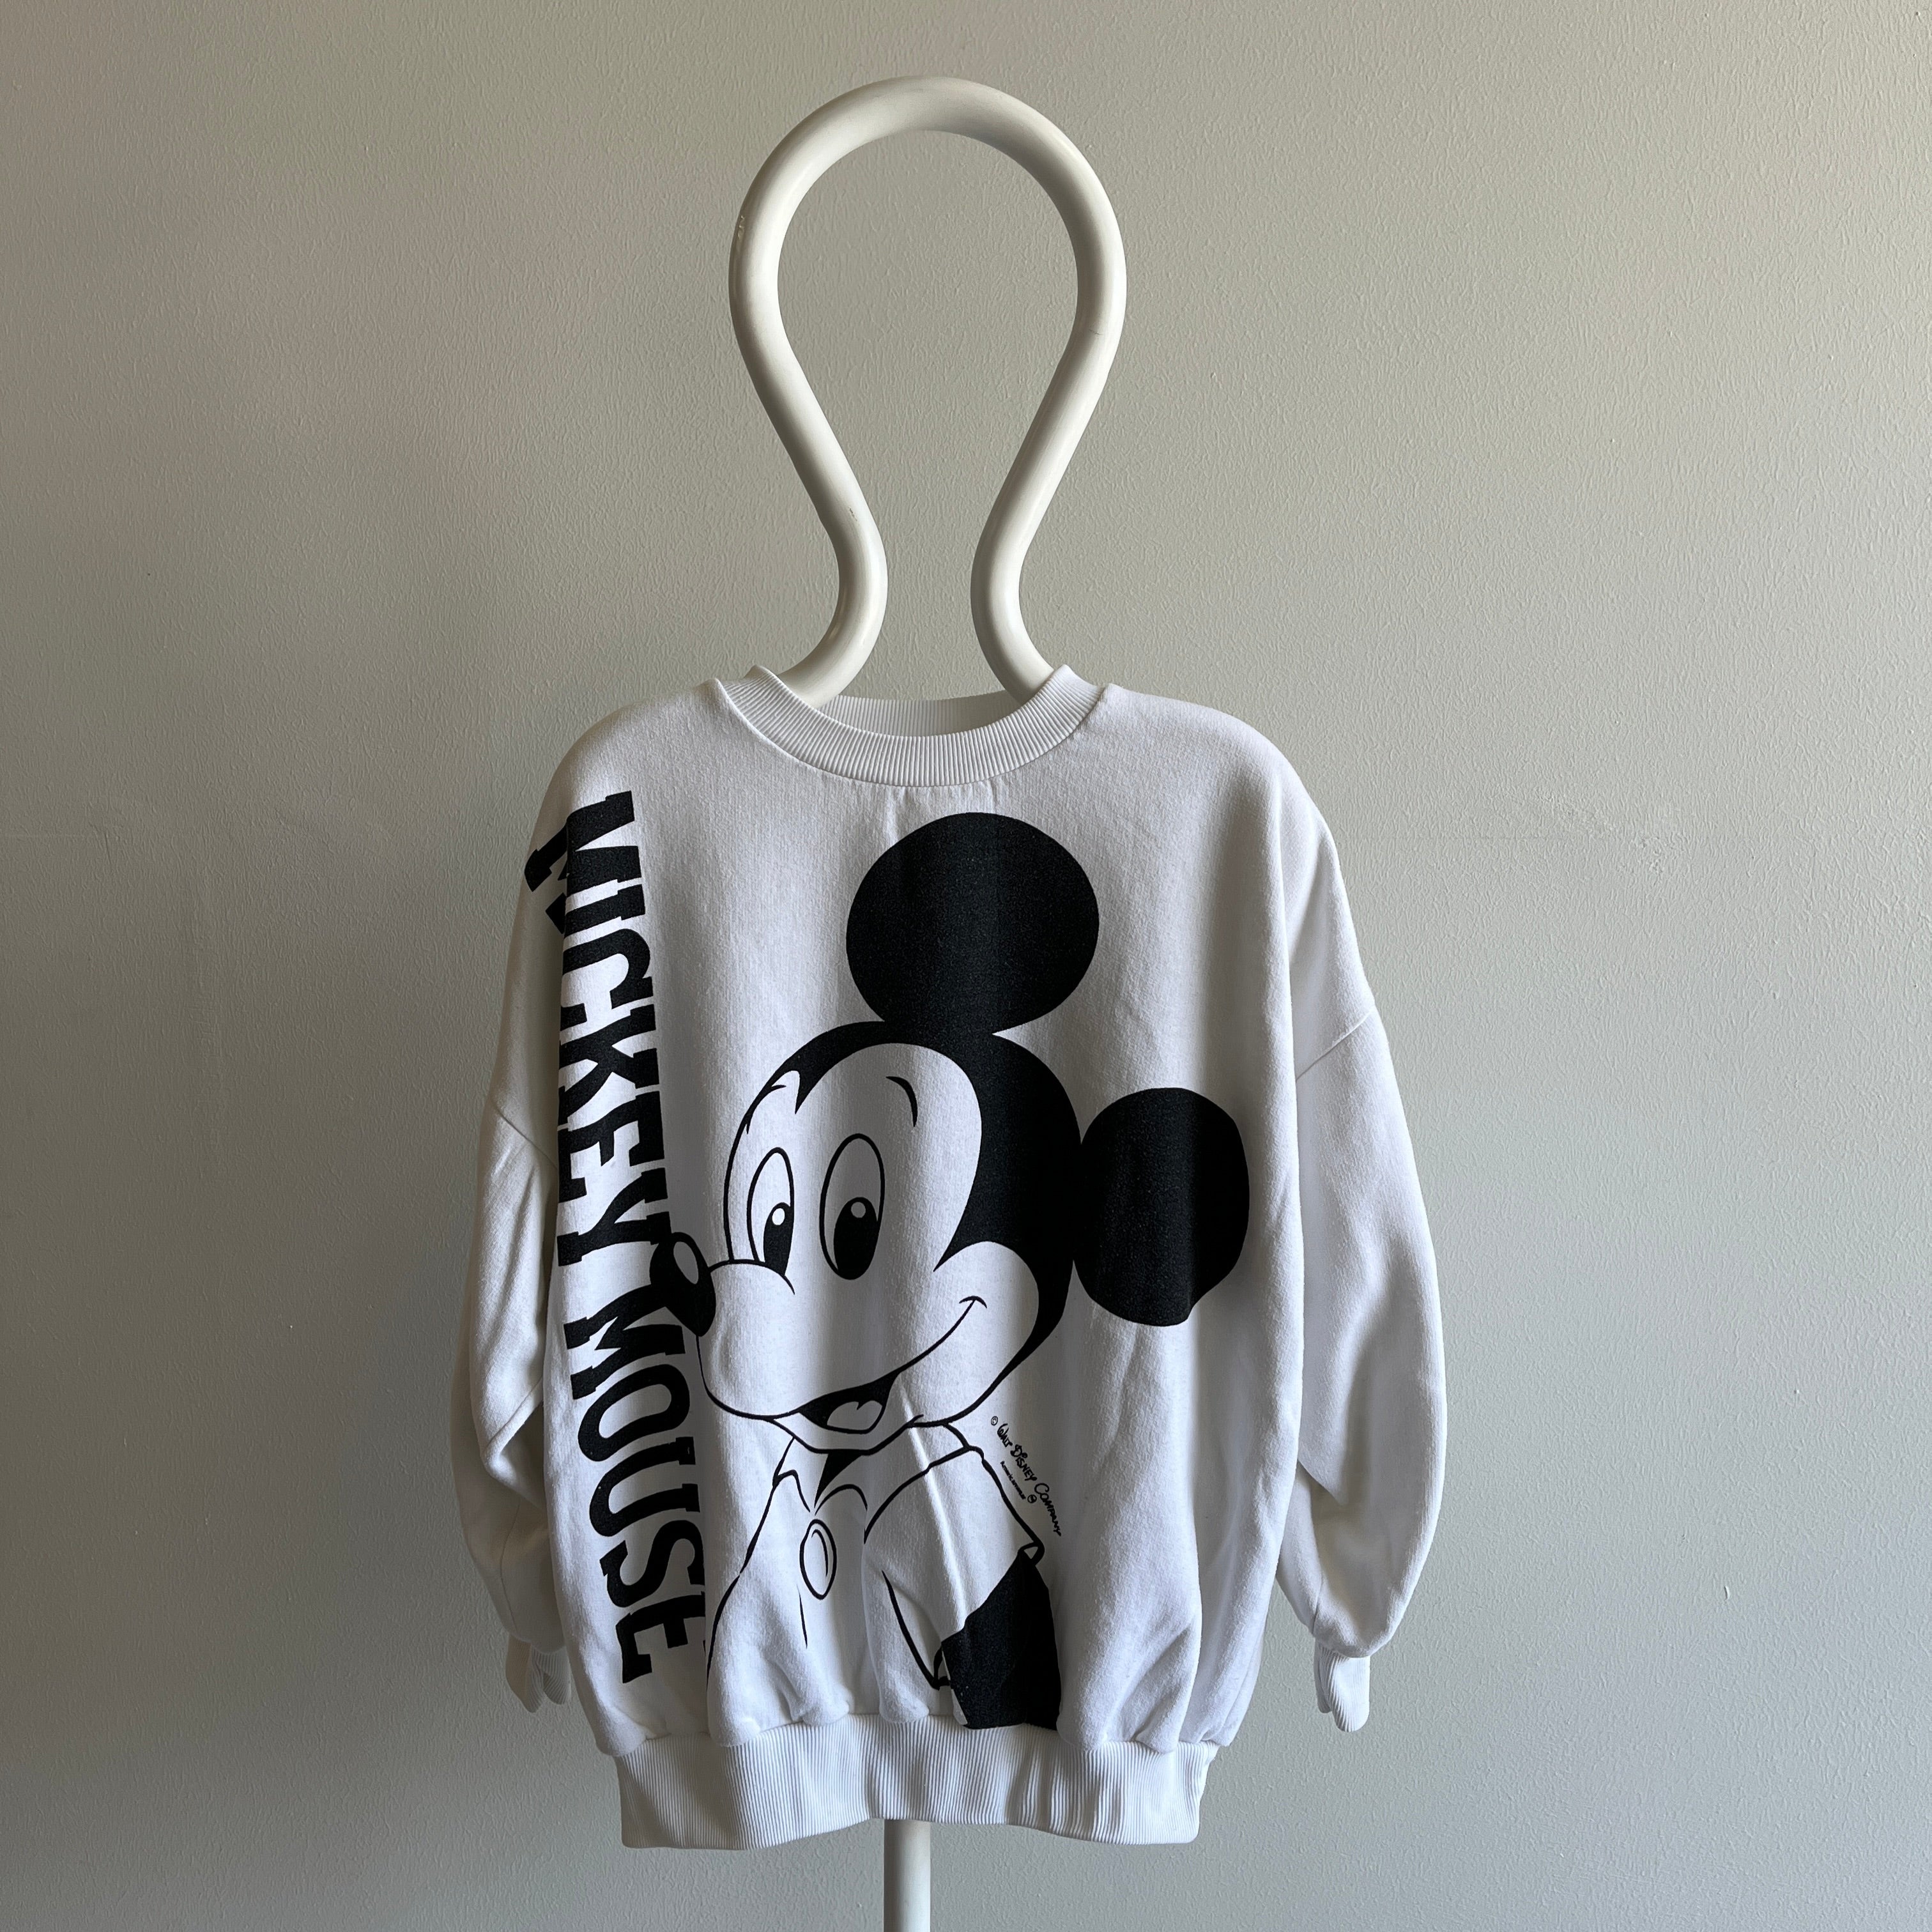 1980s Mickey Front and Back Sweatshirt - COOL (IF You LIKE MICKEY)